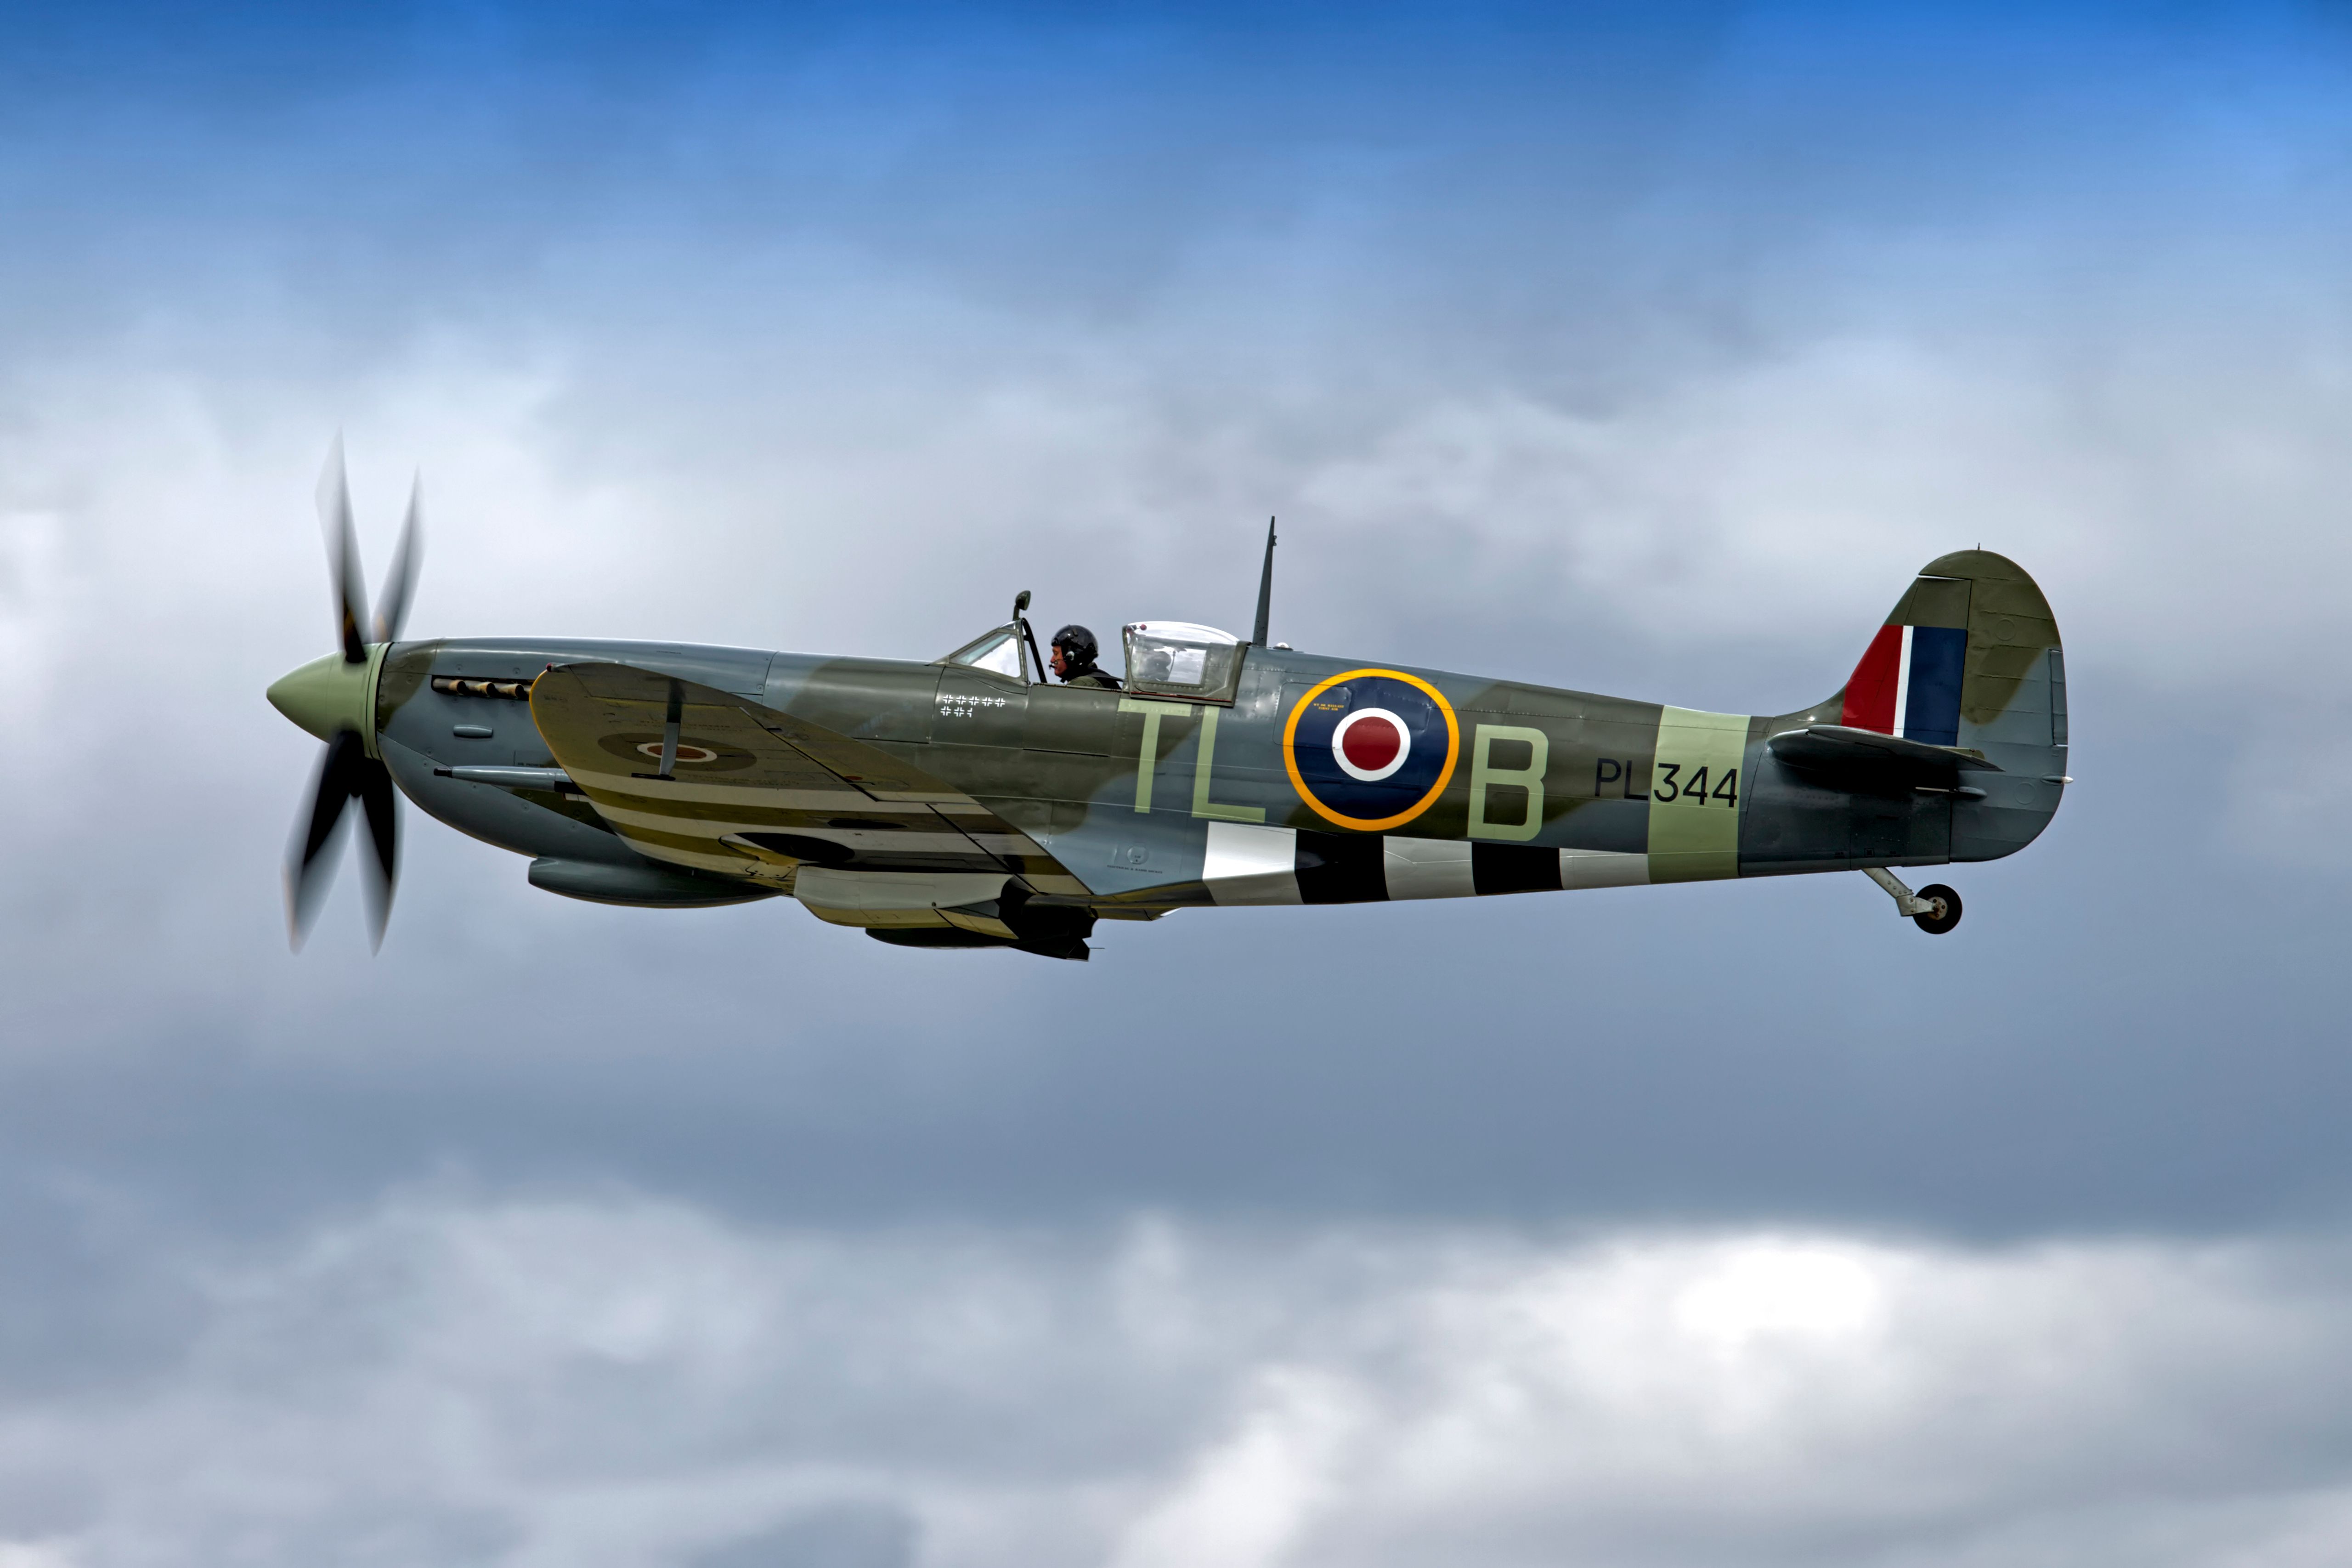 A Supermarine Spitfire flying in the sky.